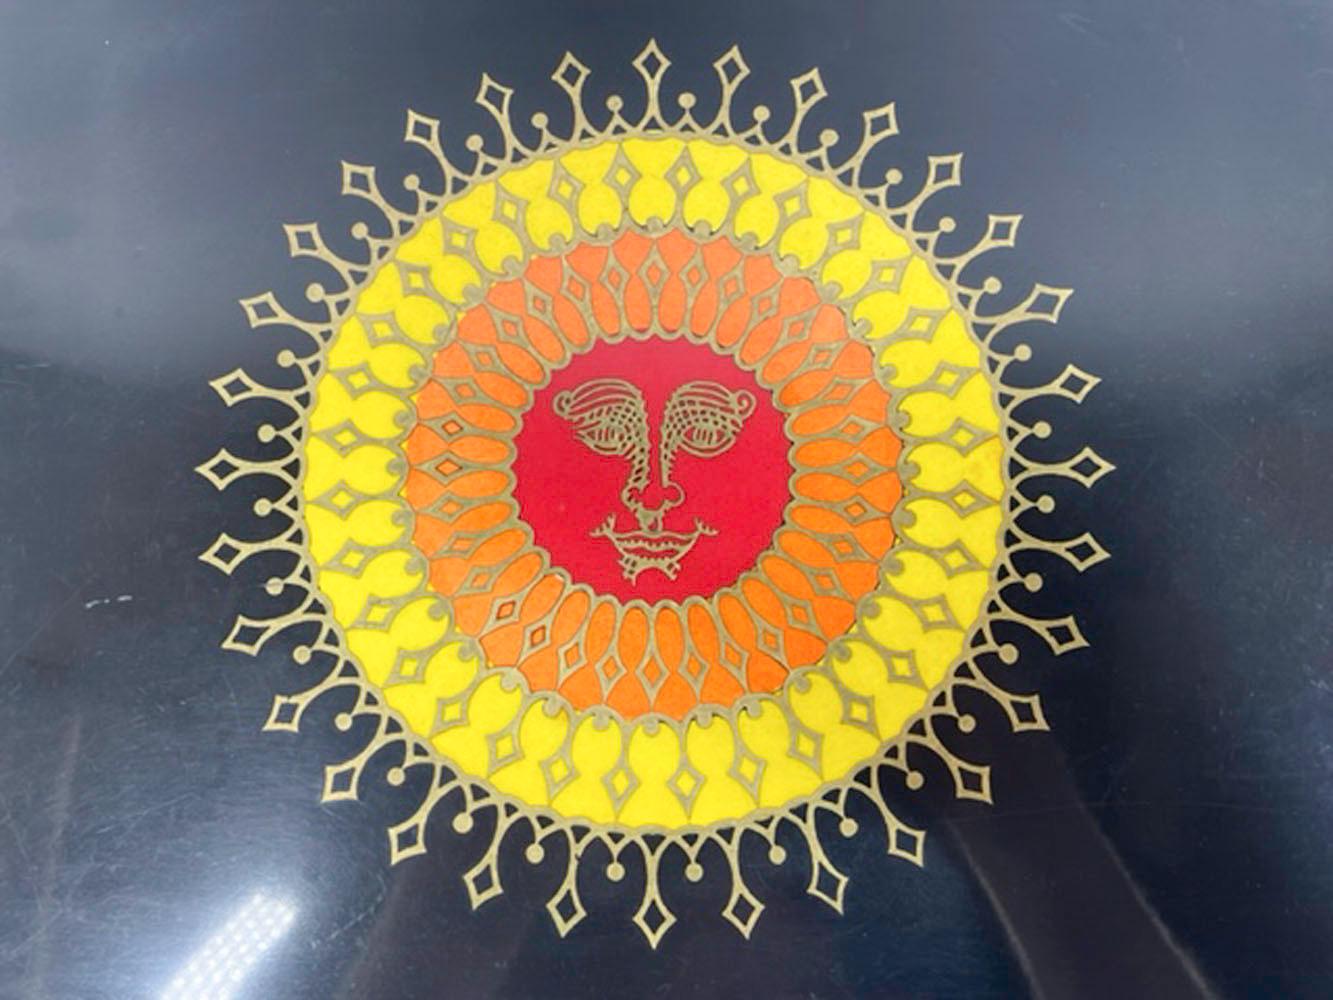 Vintage serving tray by Couroc of Monterey, made of phenolic resin inlaid with red, orange & yellow resin as well as brass, depicting a radiant sun with a face. 
Phenolic resin is resistant to damage from alcohol and hot water, making it ideal for